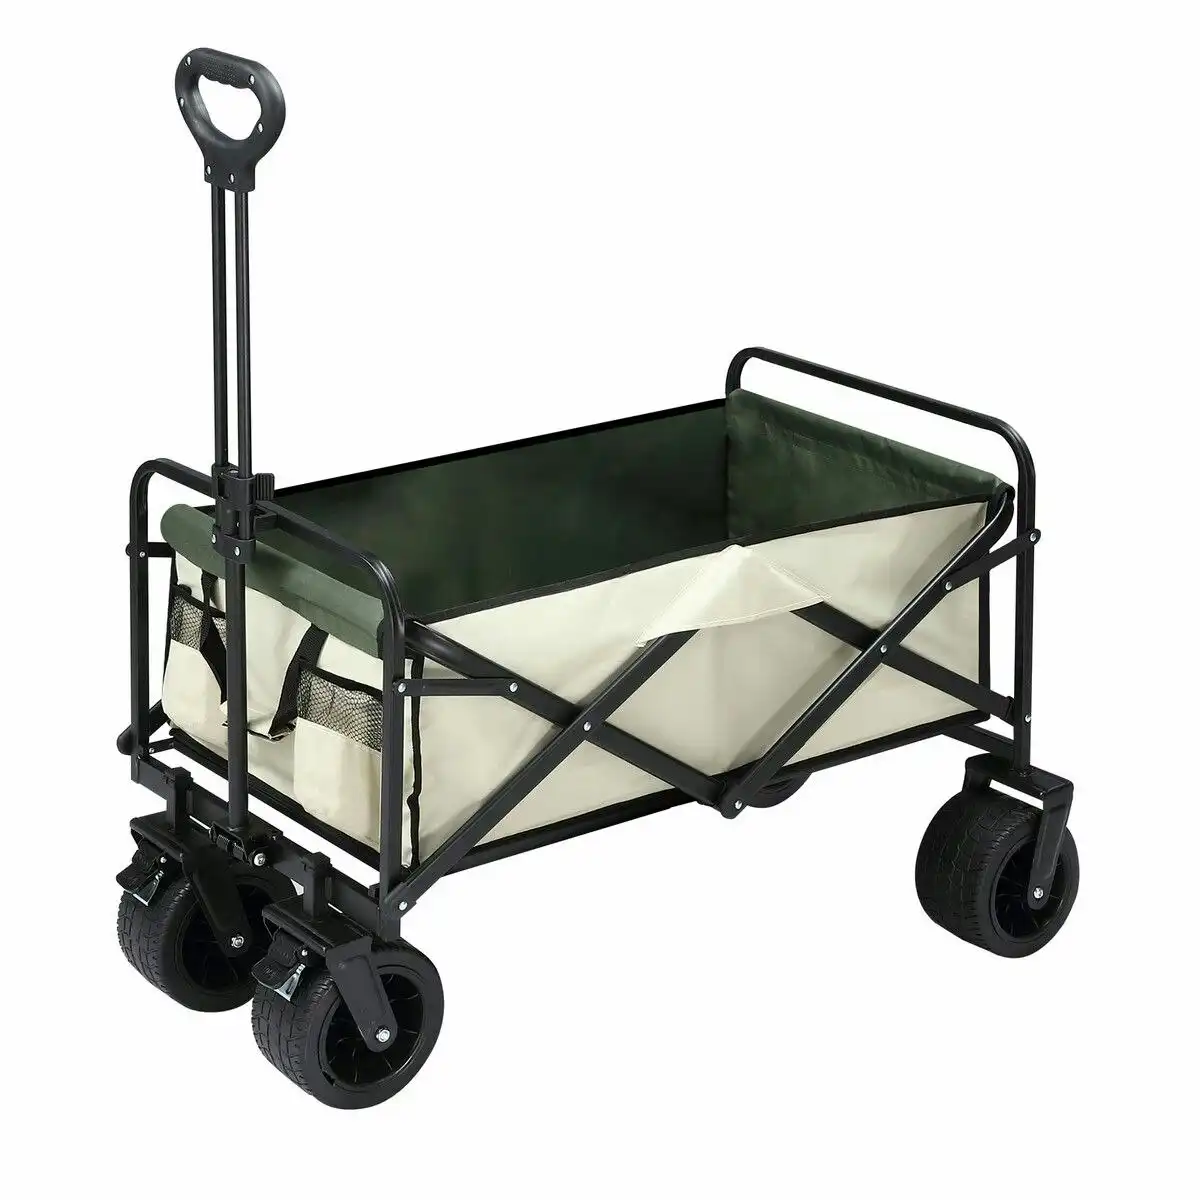 Ausway Garden Beach Cart Wagon Foldable Utility Shopping Trolley Trailer Outdoor Picnic Camping Sports Market Barrow Luggage Grocery Collapsible 150kg